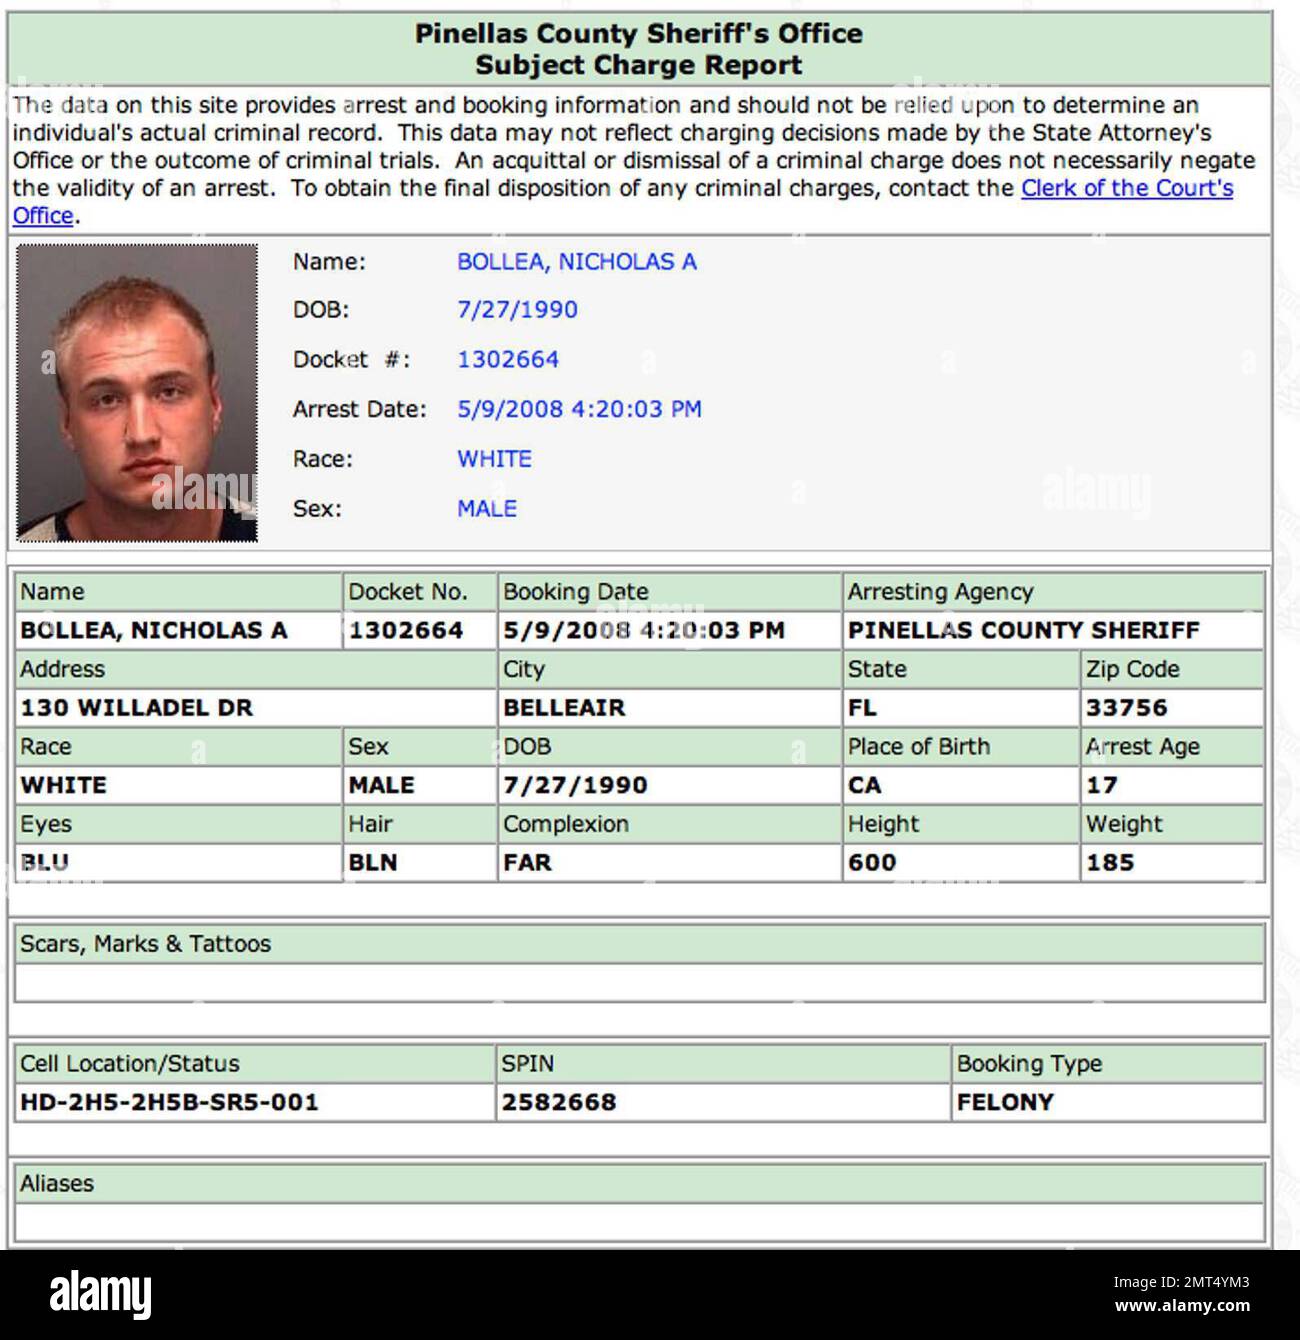 This is the mugshot and booking information for Nick Hogan (real name Nicholas Bollea) who was sentenced today to eight months in jail, five years probation during which he is to serve 500 hours of community service, and a three-year suspension of his driver's licence. The sentence stems from the August 6, 007 car accident that left Hogan's best friend, John Graziano, in critical condition. The presiding judge specifically asked that Bollea use his community service to do something positive 'that reflects what John [Graziano] did in his service to our country as a Marine.' Also, citing Hogan's Stock Photo